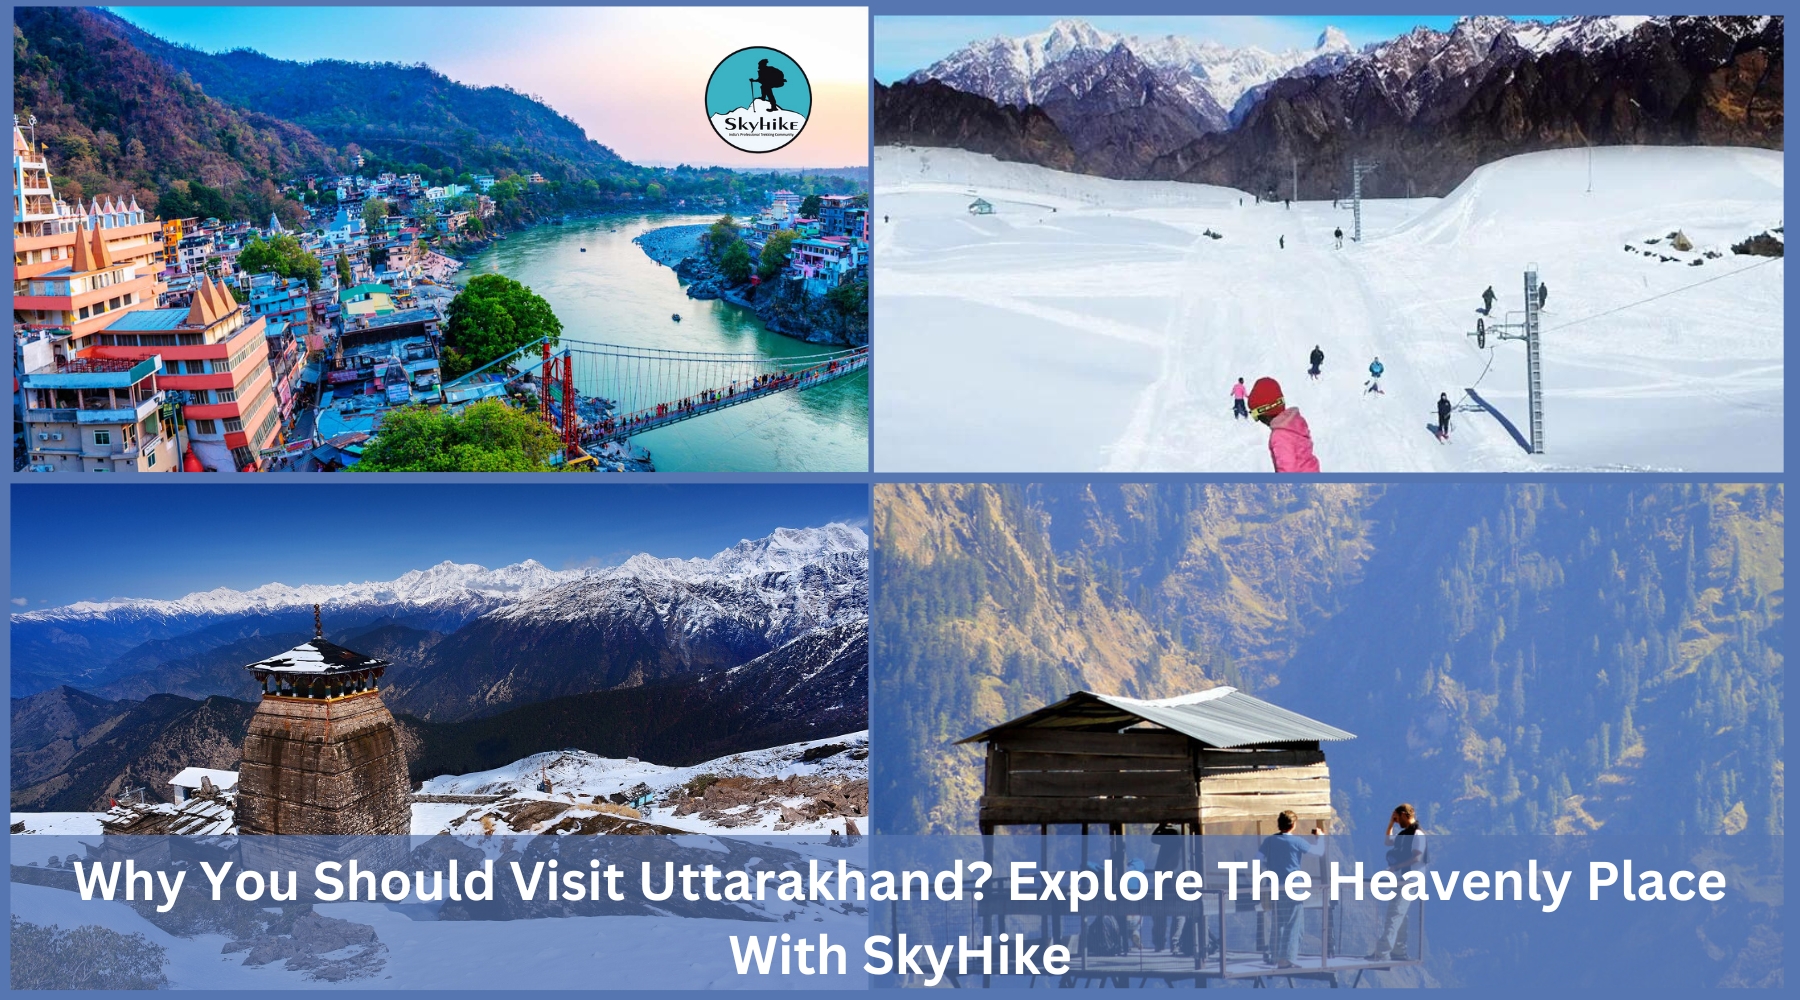 Why You Should Visit Uttarakhand? Explore The Heavenly Place With SkyHike